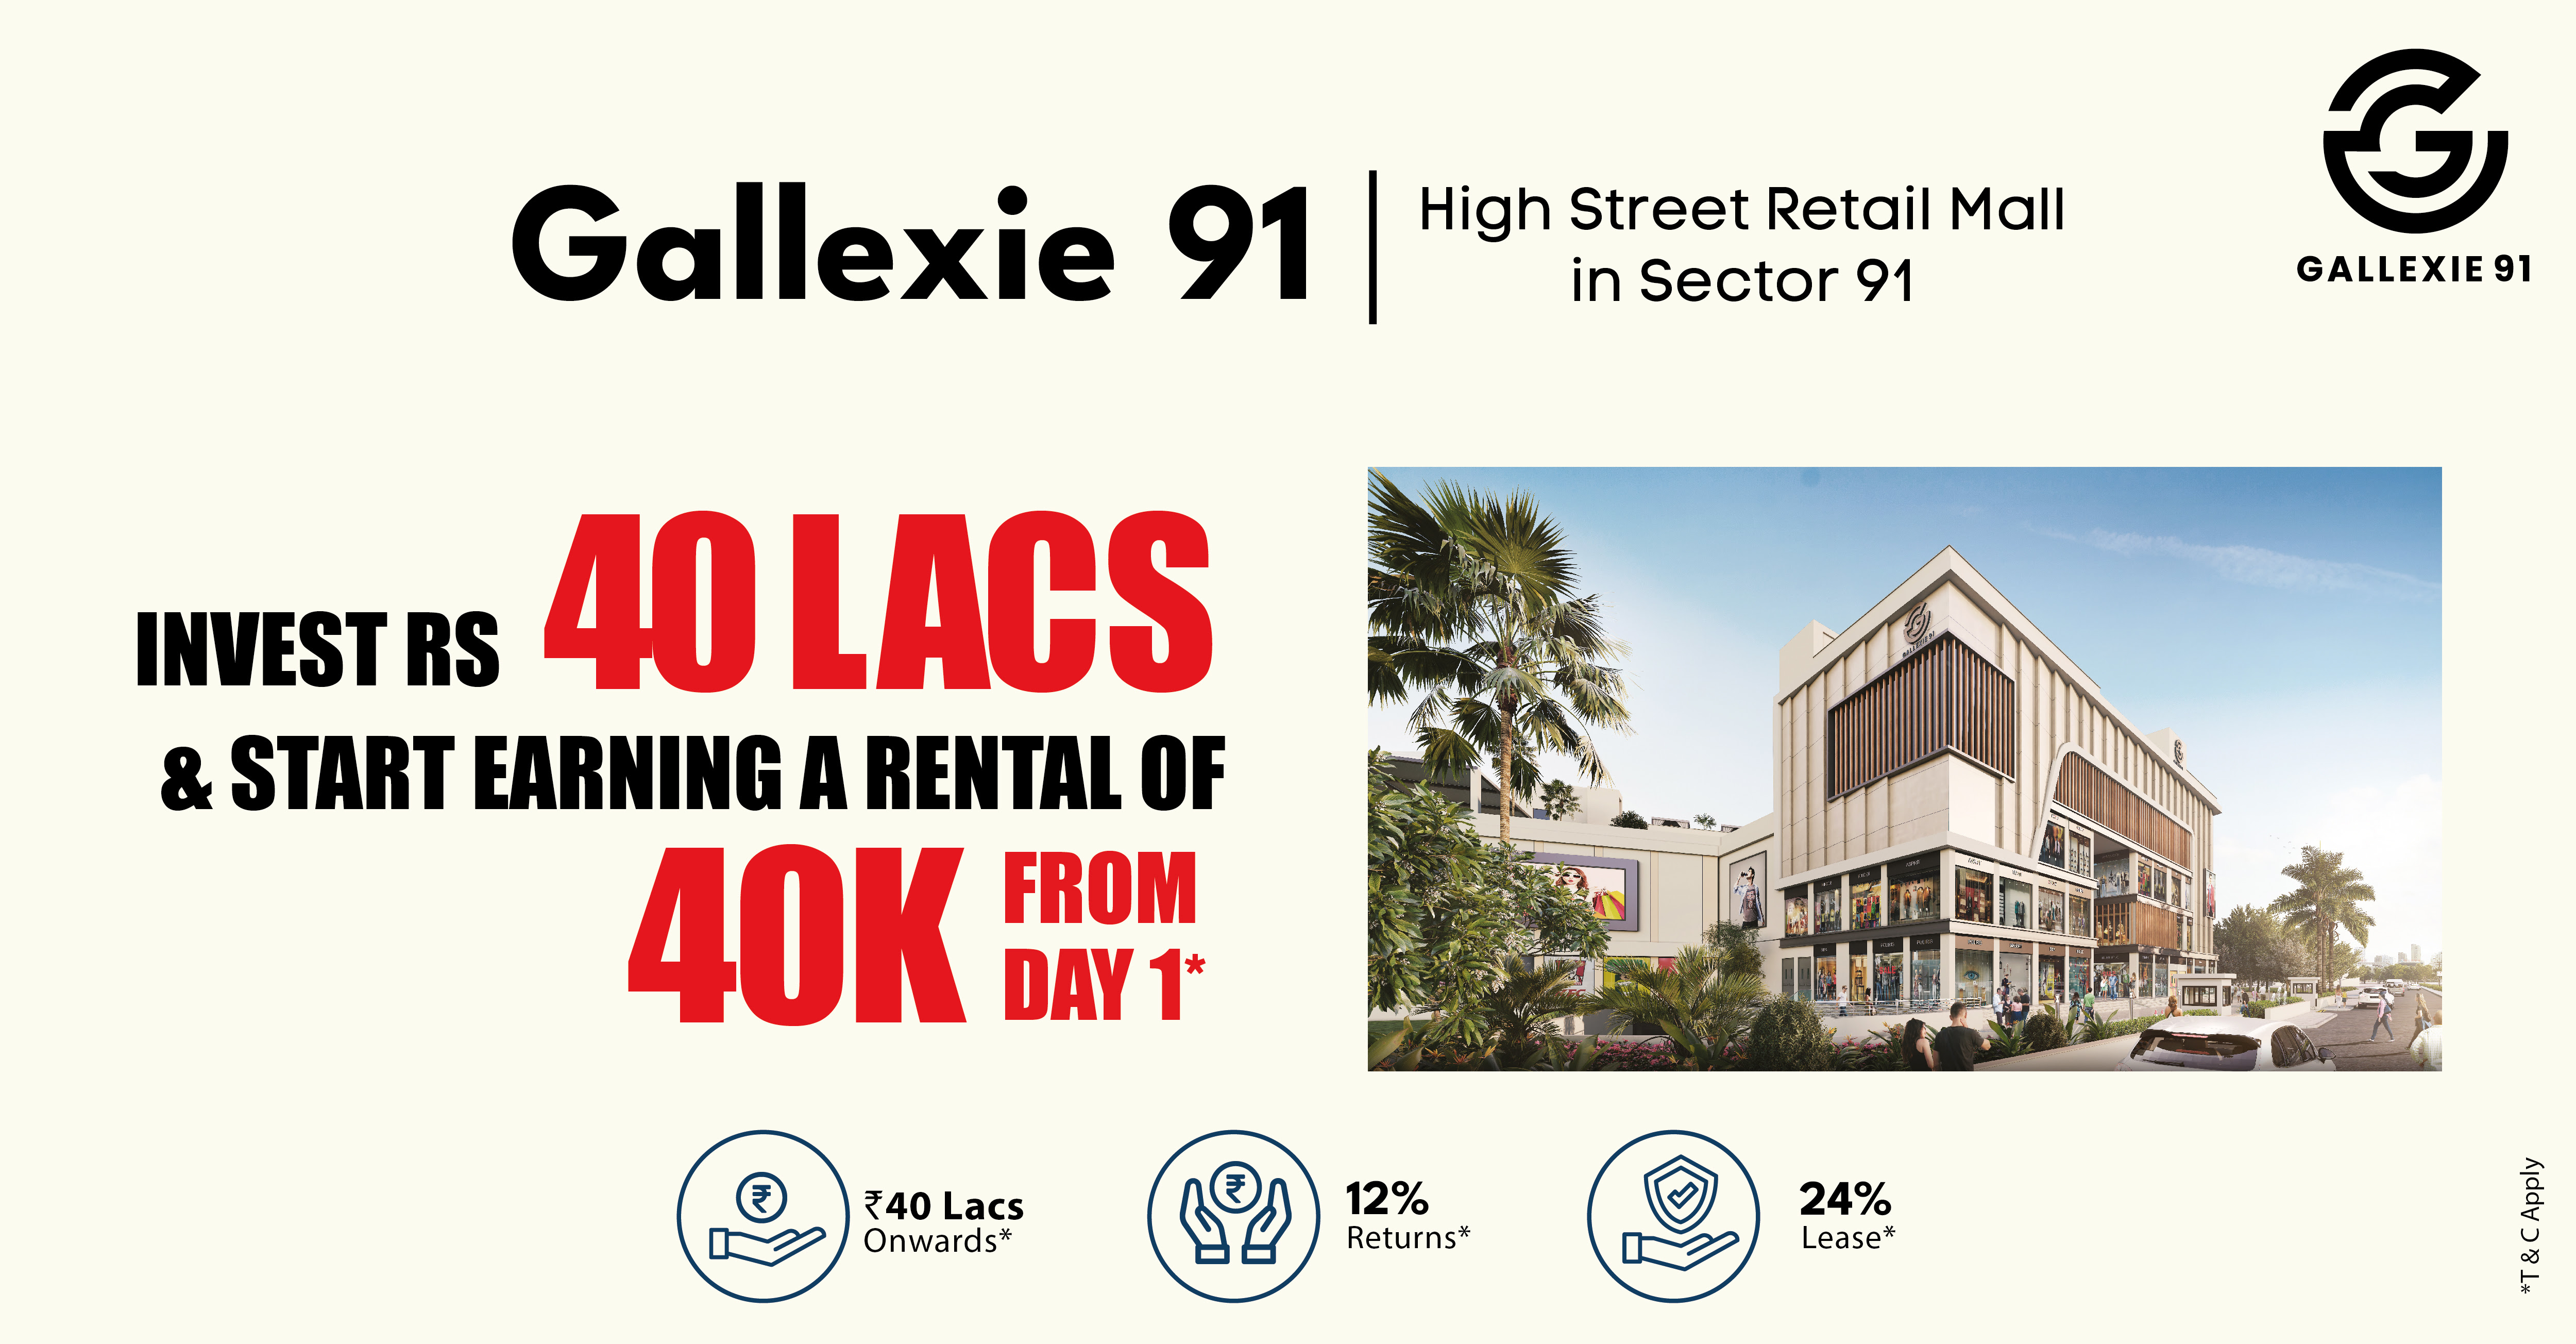 Invest 40 Lac & earn Rs 40k from Day 1 at Axon Gallexie 91, Gurgaon Update